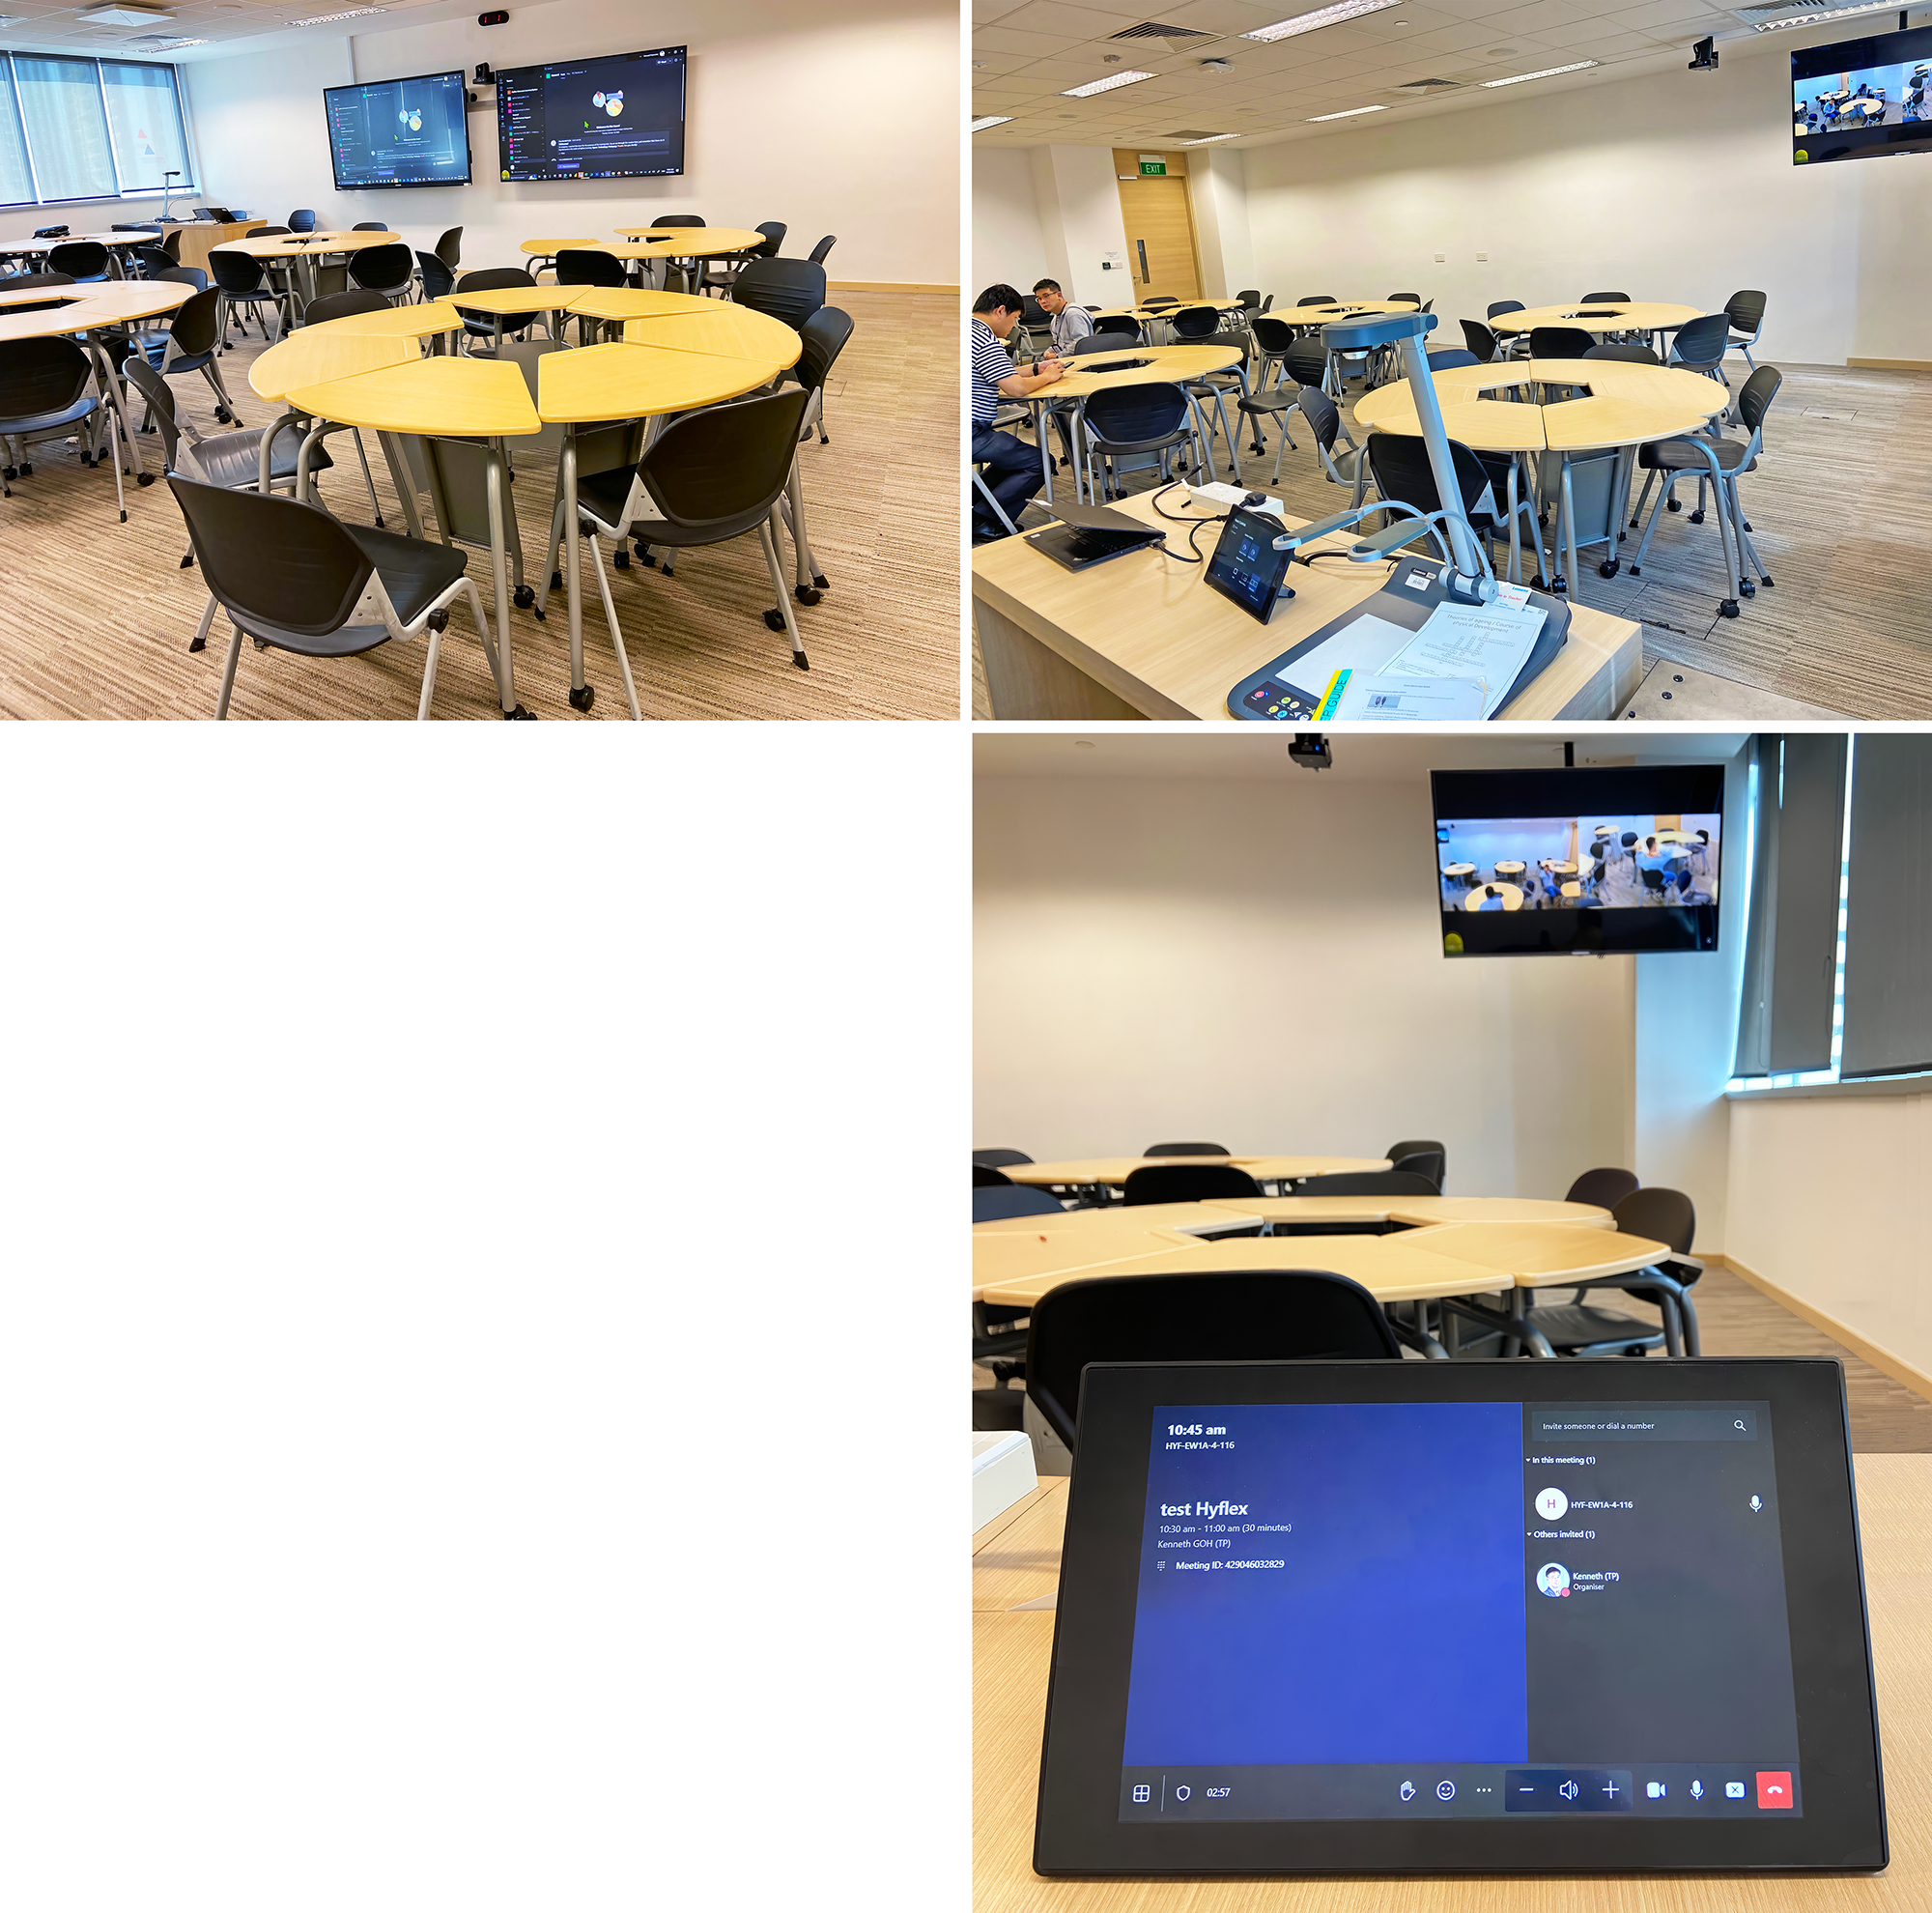 This HyFlex classroom is configured for active learning. Students in the classroom gather around circular tables. Remote students view the room through PTZ cameras. Instructors control the AV system through a Lenovo ThinkSmart touchpanel. Extron LinkLicense® For User Interfaces allows the Lenovo touchpanel to operate seamlessly with the Extron AV system control processor, which creates the touchpanel graphical user interface and executes selections made at the touchpanel. All photos courtesy of Temasek Polytechnic and Digiworz PTE, Ltd.